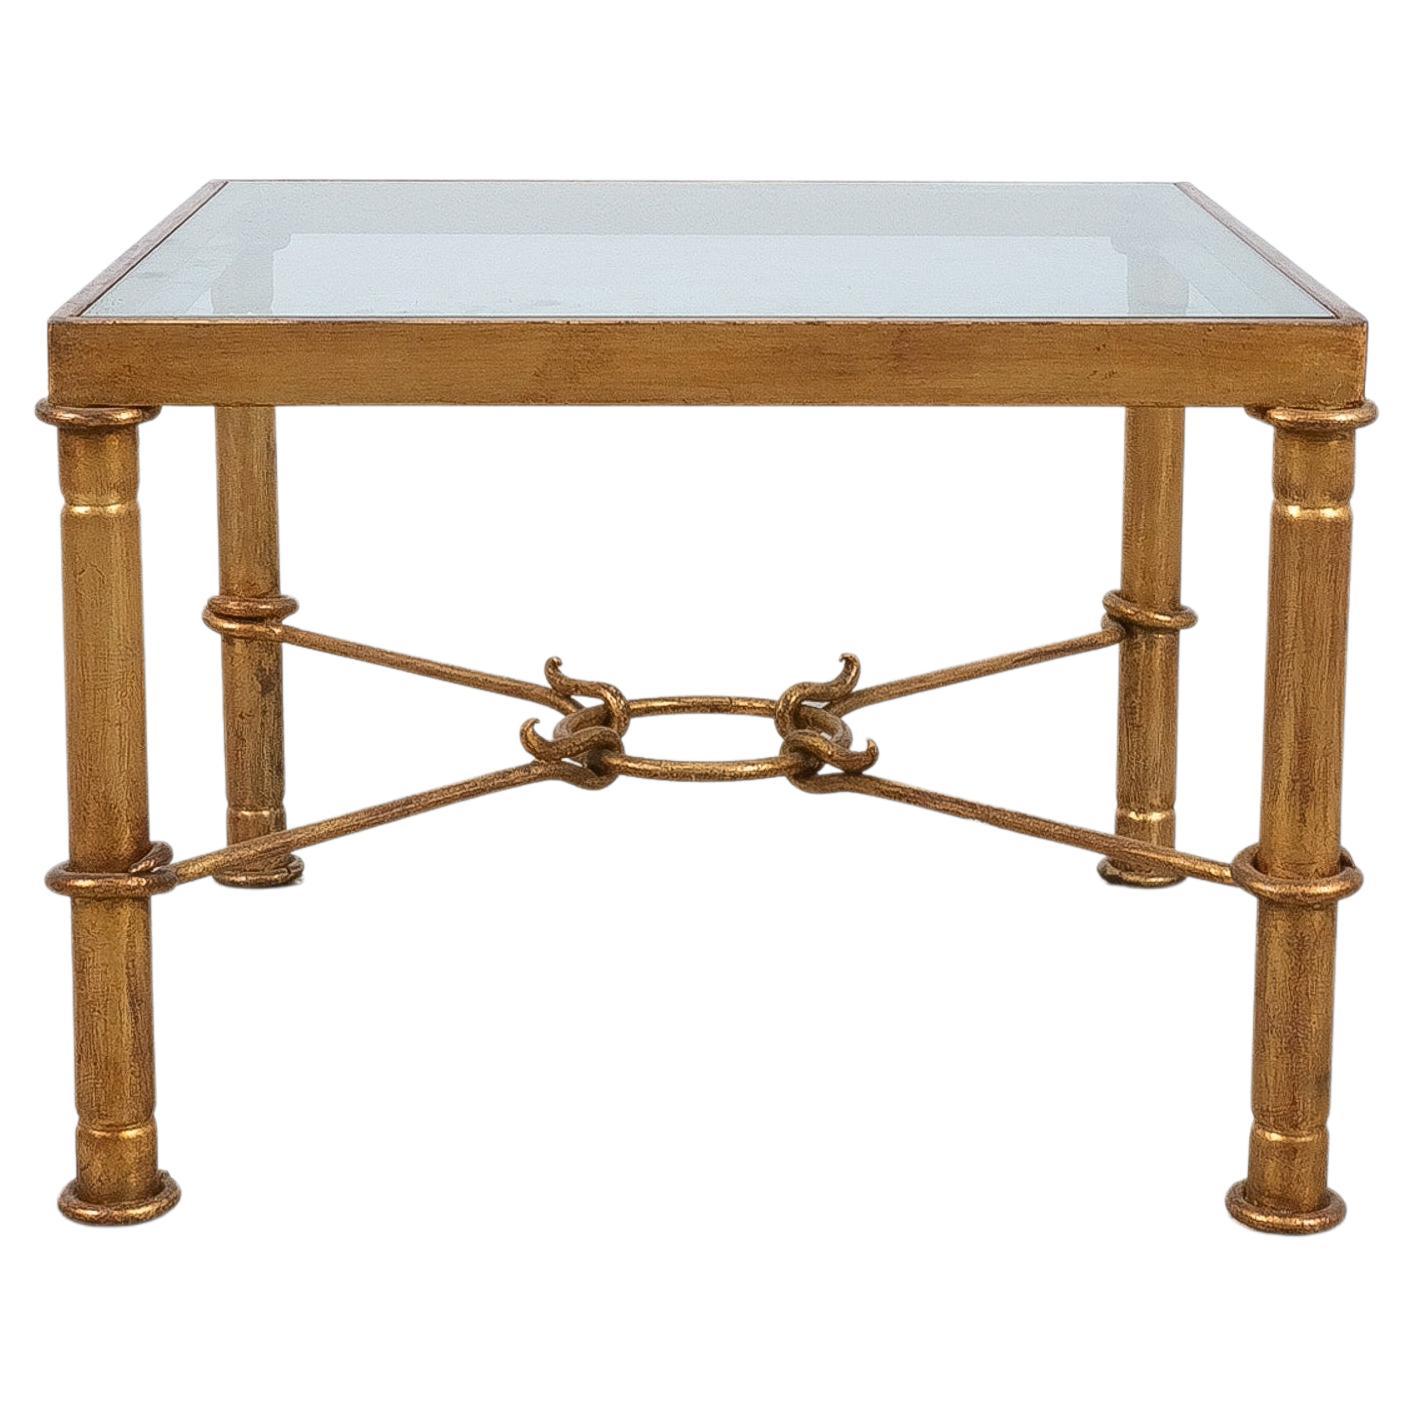 Hermes Gilt Iron Coffee Table by Giovanni Banci, Italy, Midcentury